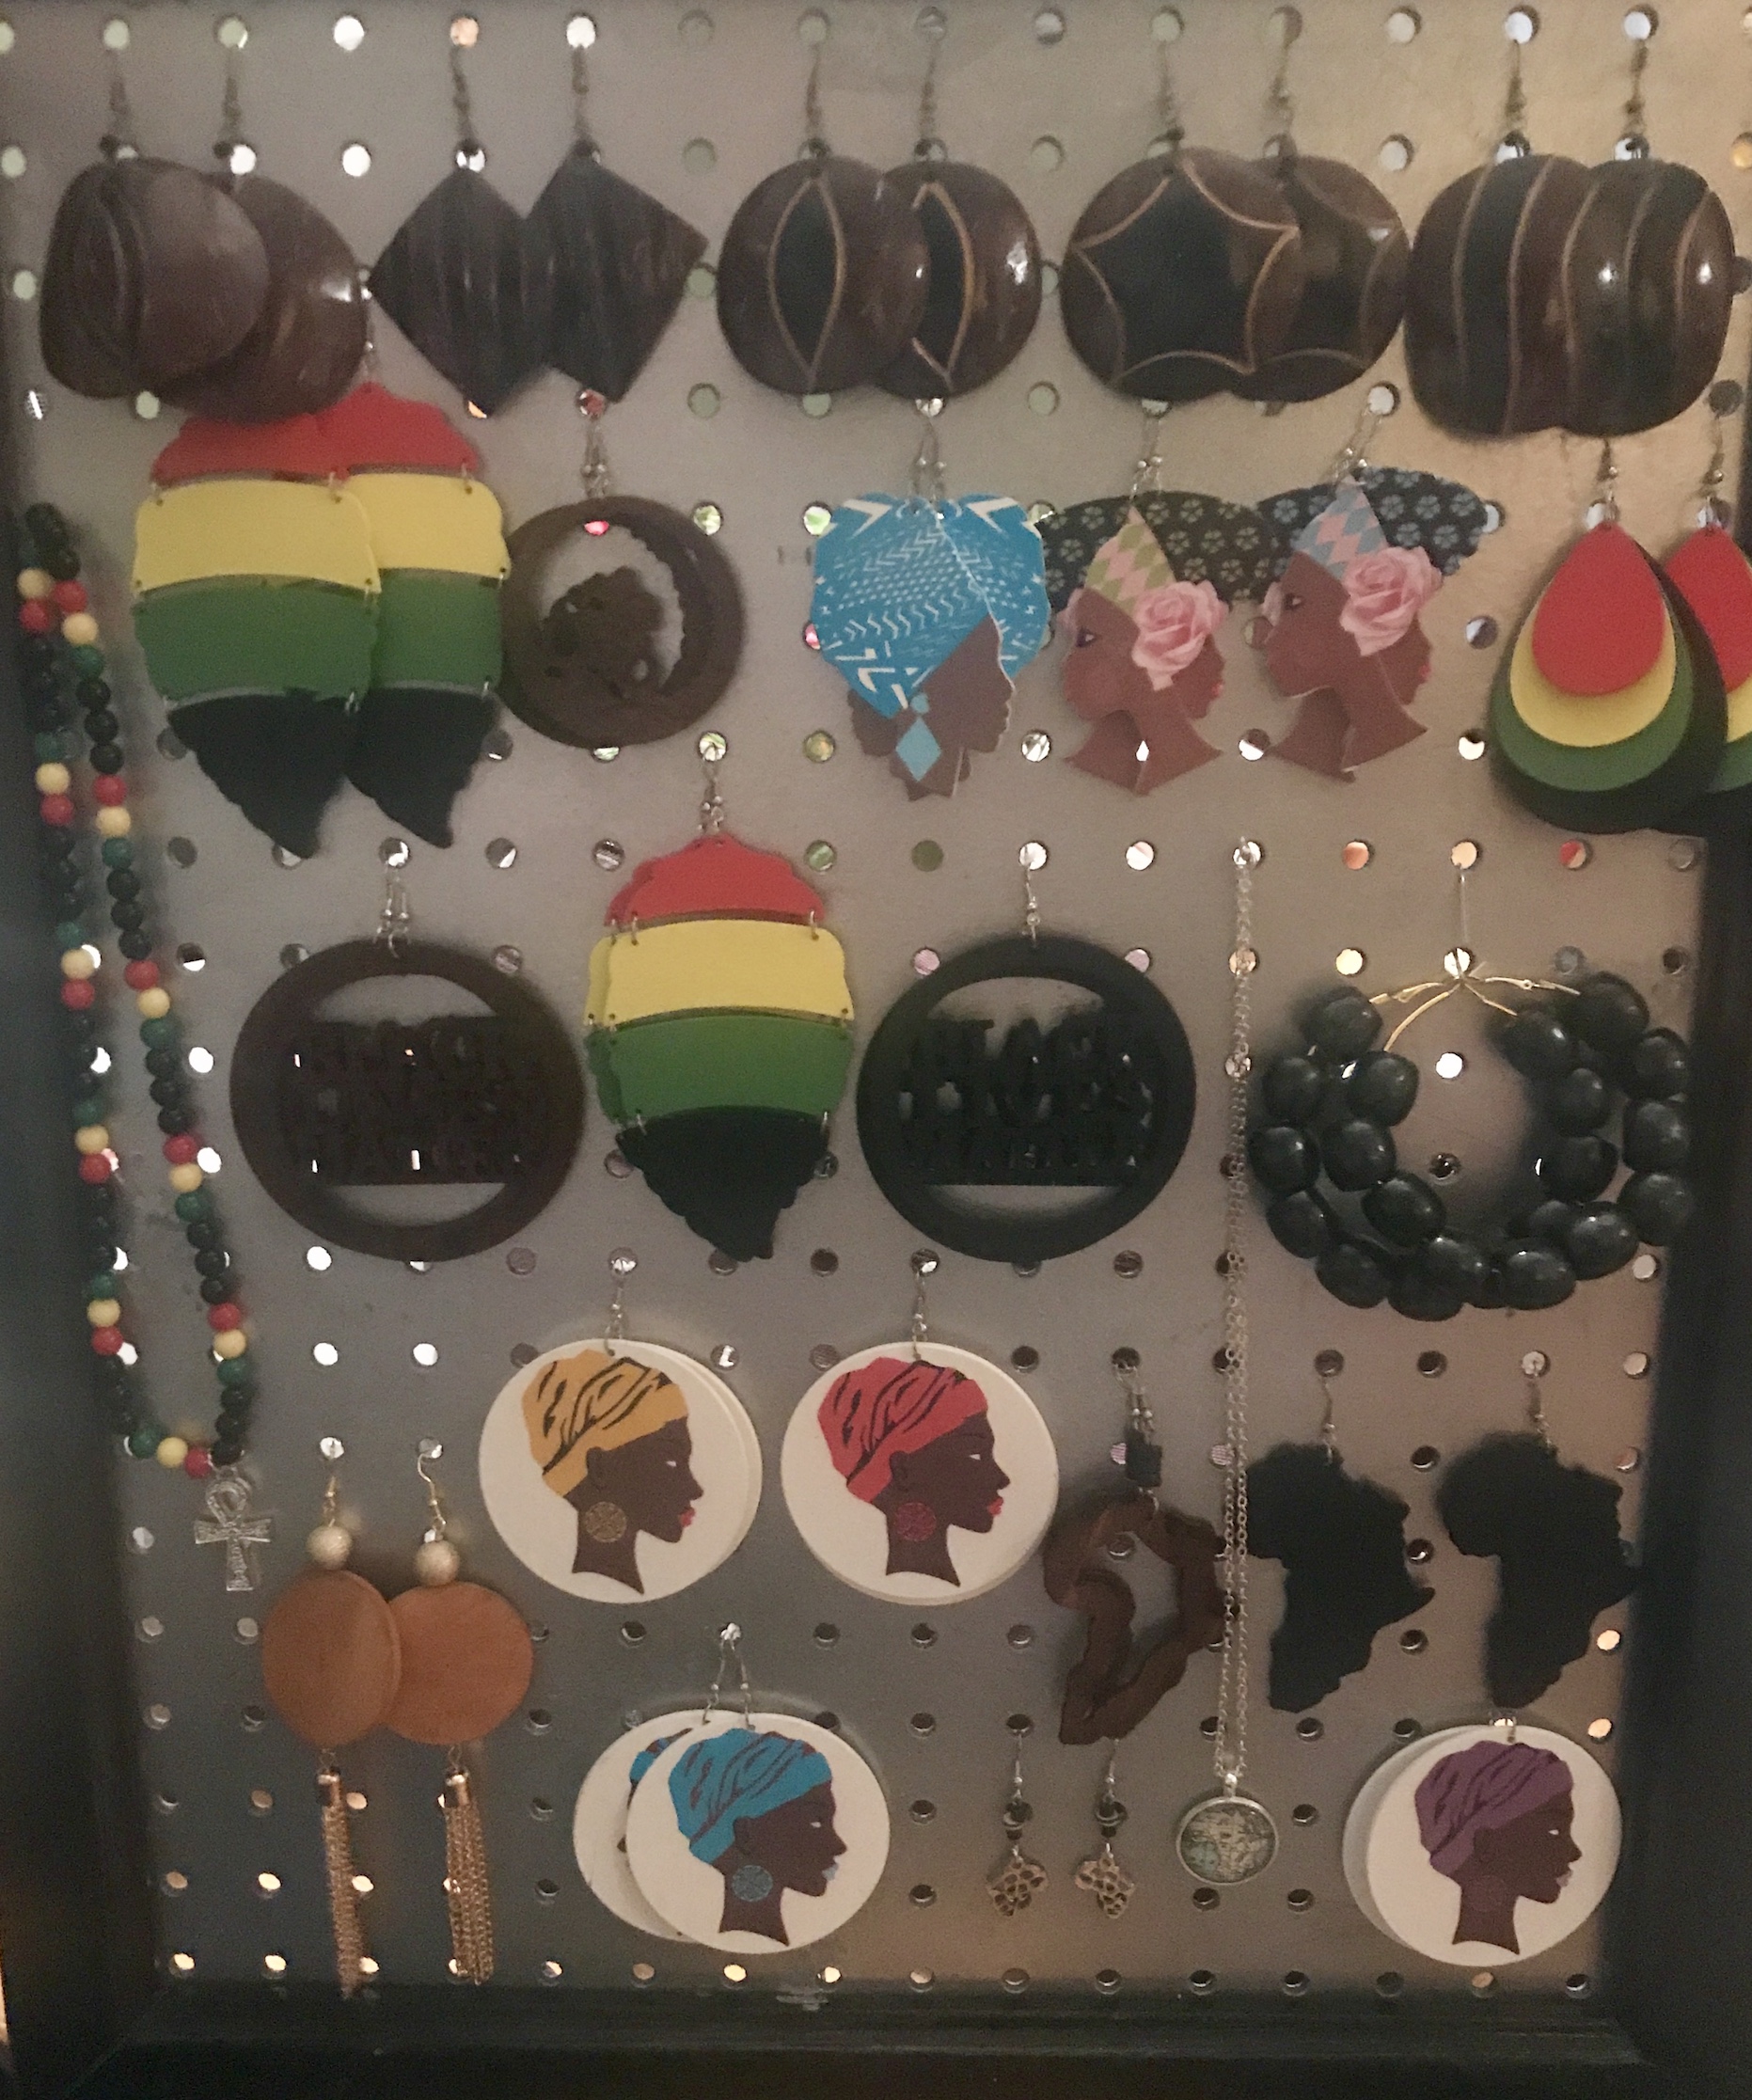 Top 2 rows only Earrings and things